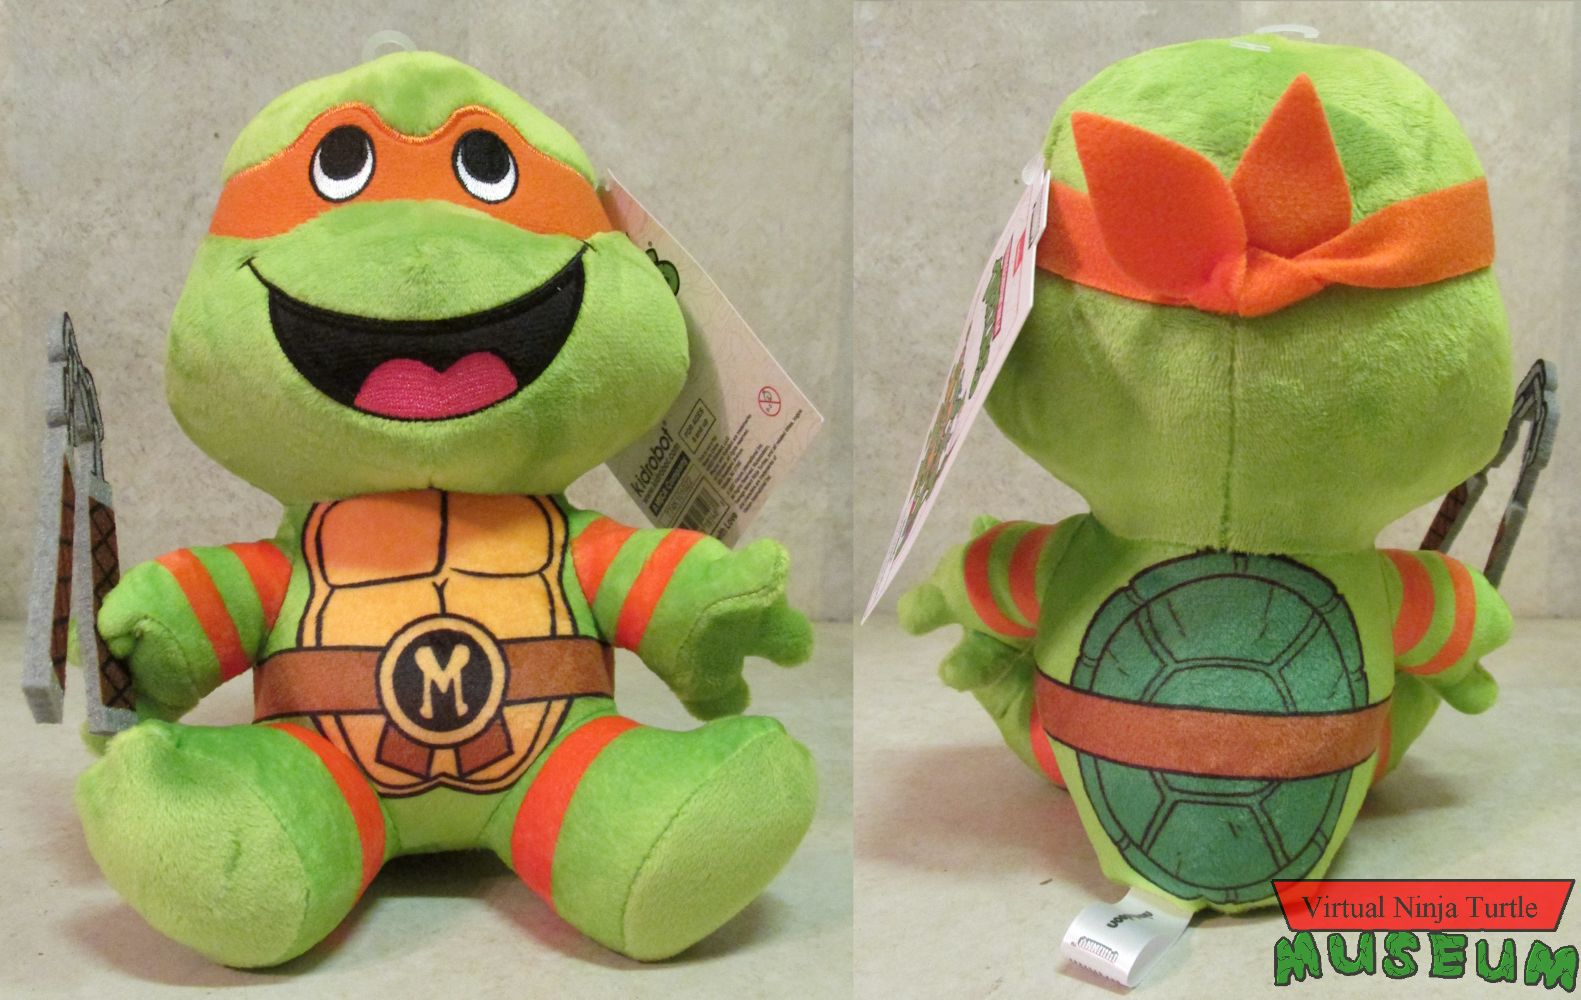 Phunny Michelangelo Plush front and back